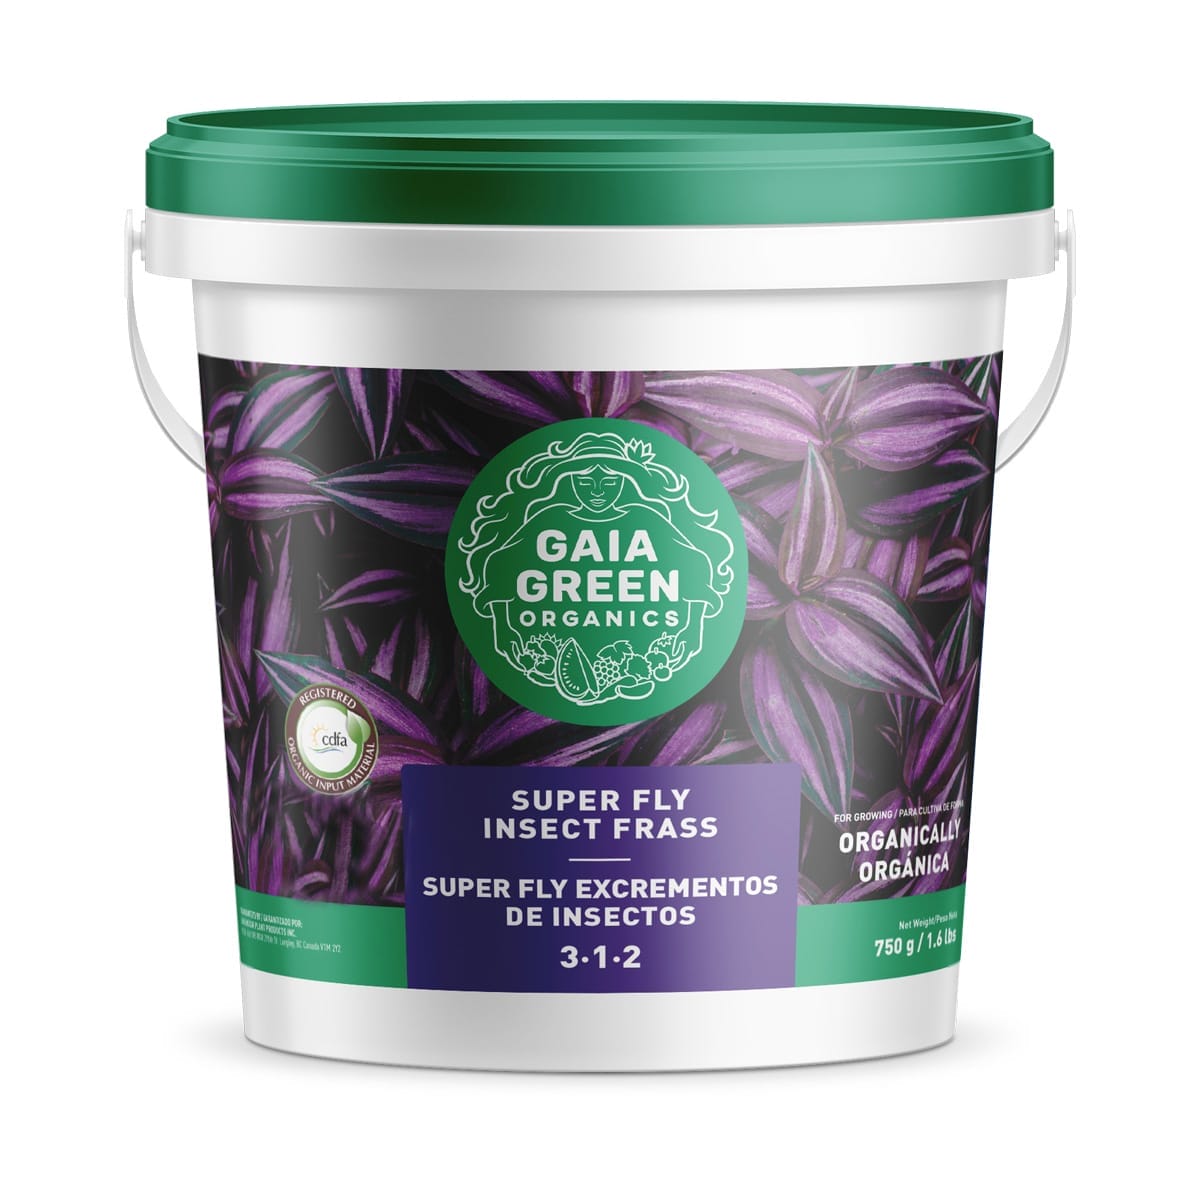 Gaia Green Organics Super Fly Insect Frass 750g